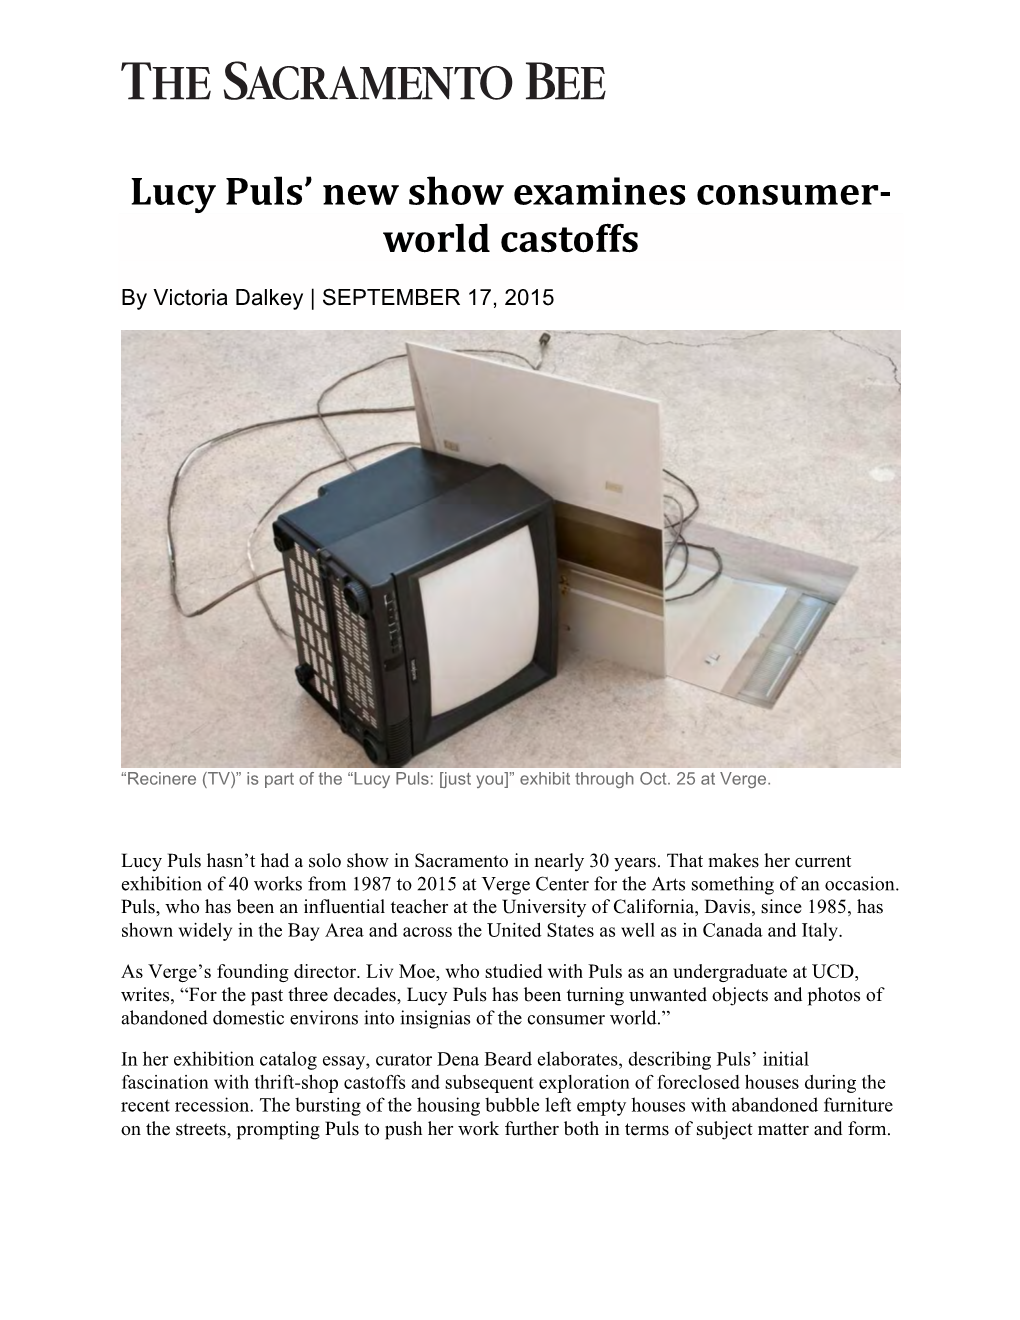 Lucy Puls' New Show Examines Consumer